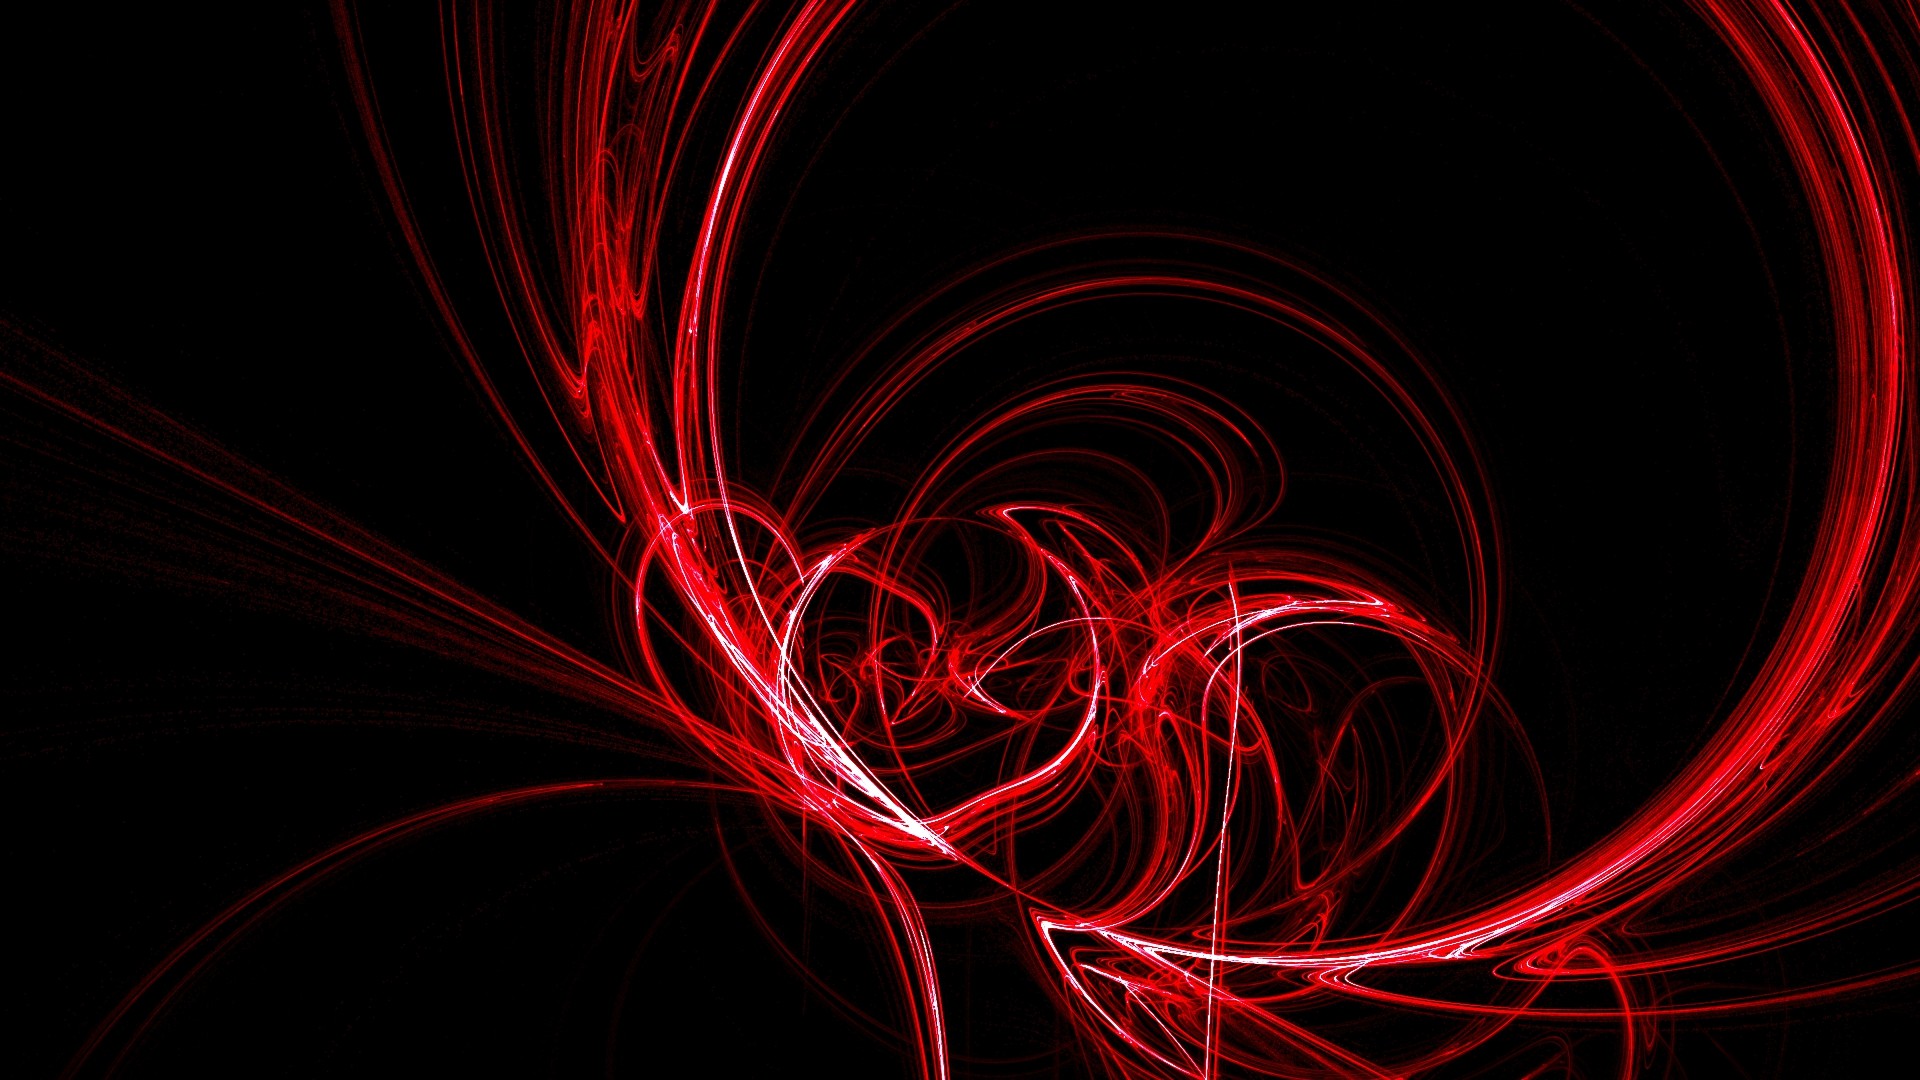 1920x1080 Cool Dark Red Abstract Hd Wallpaper px